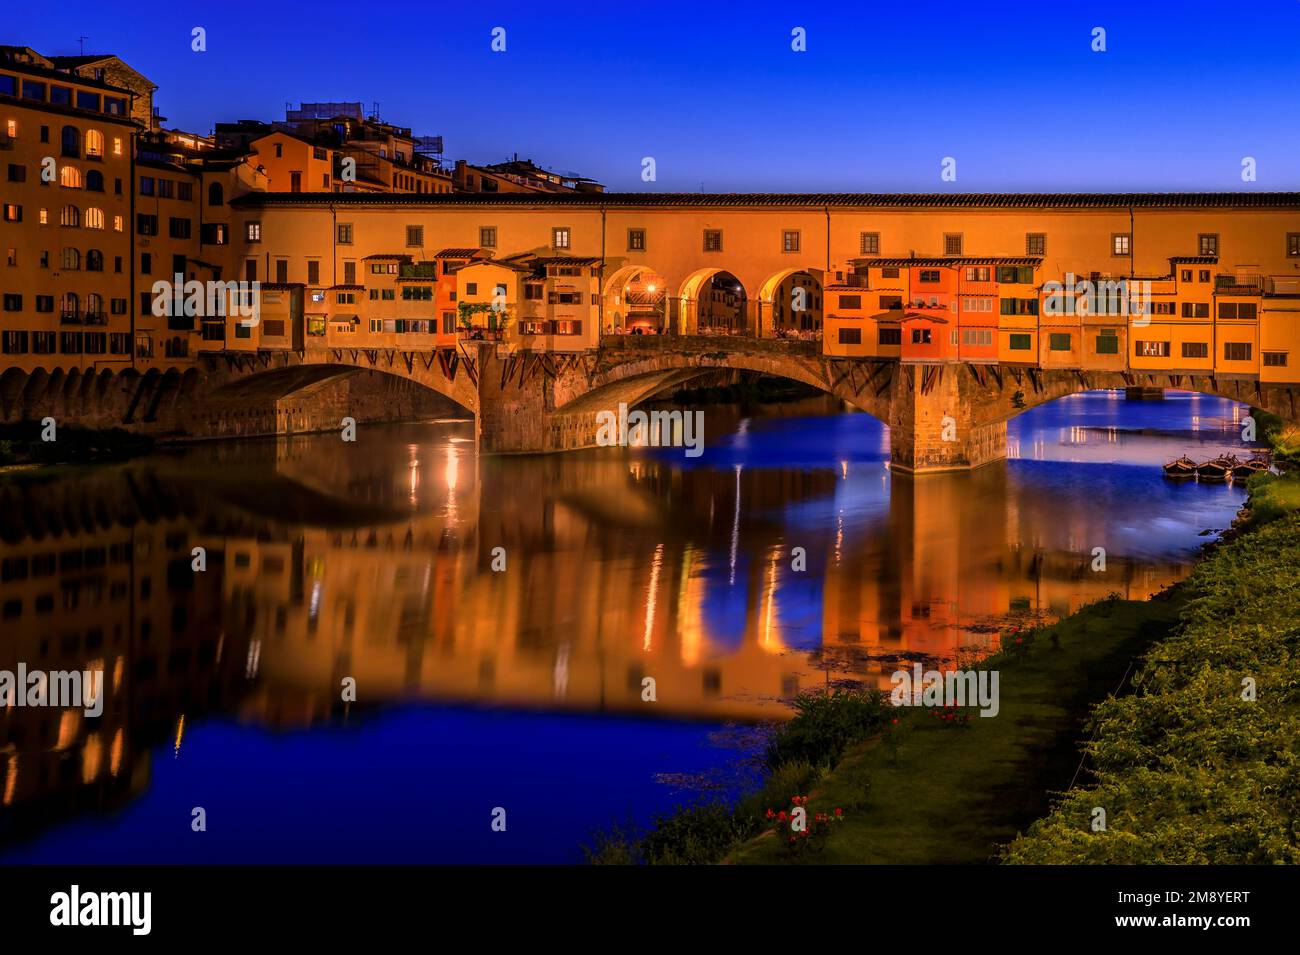 Close up of silversmith shops on the famous Ponte Vecchio bridge on the Arno River in Centro Storico, Florence, Italy at sunset Stock Photo